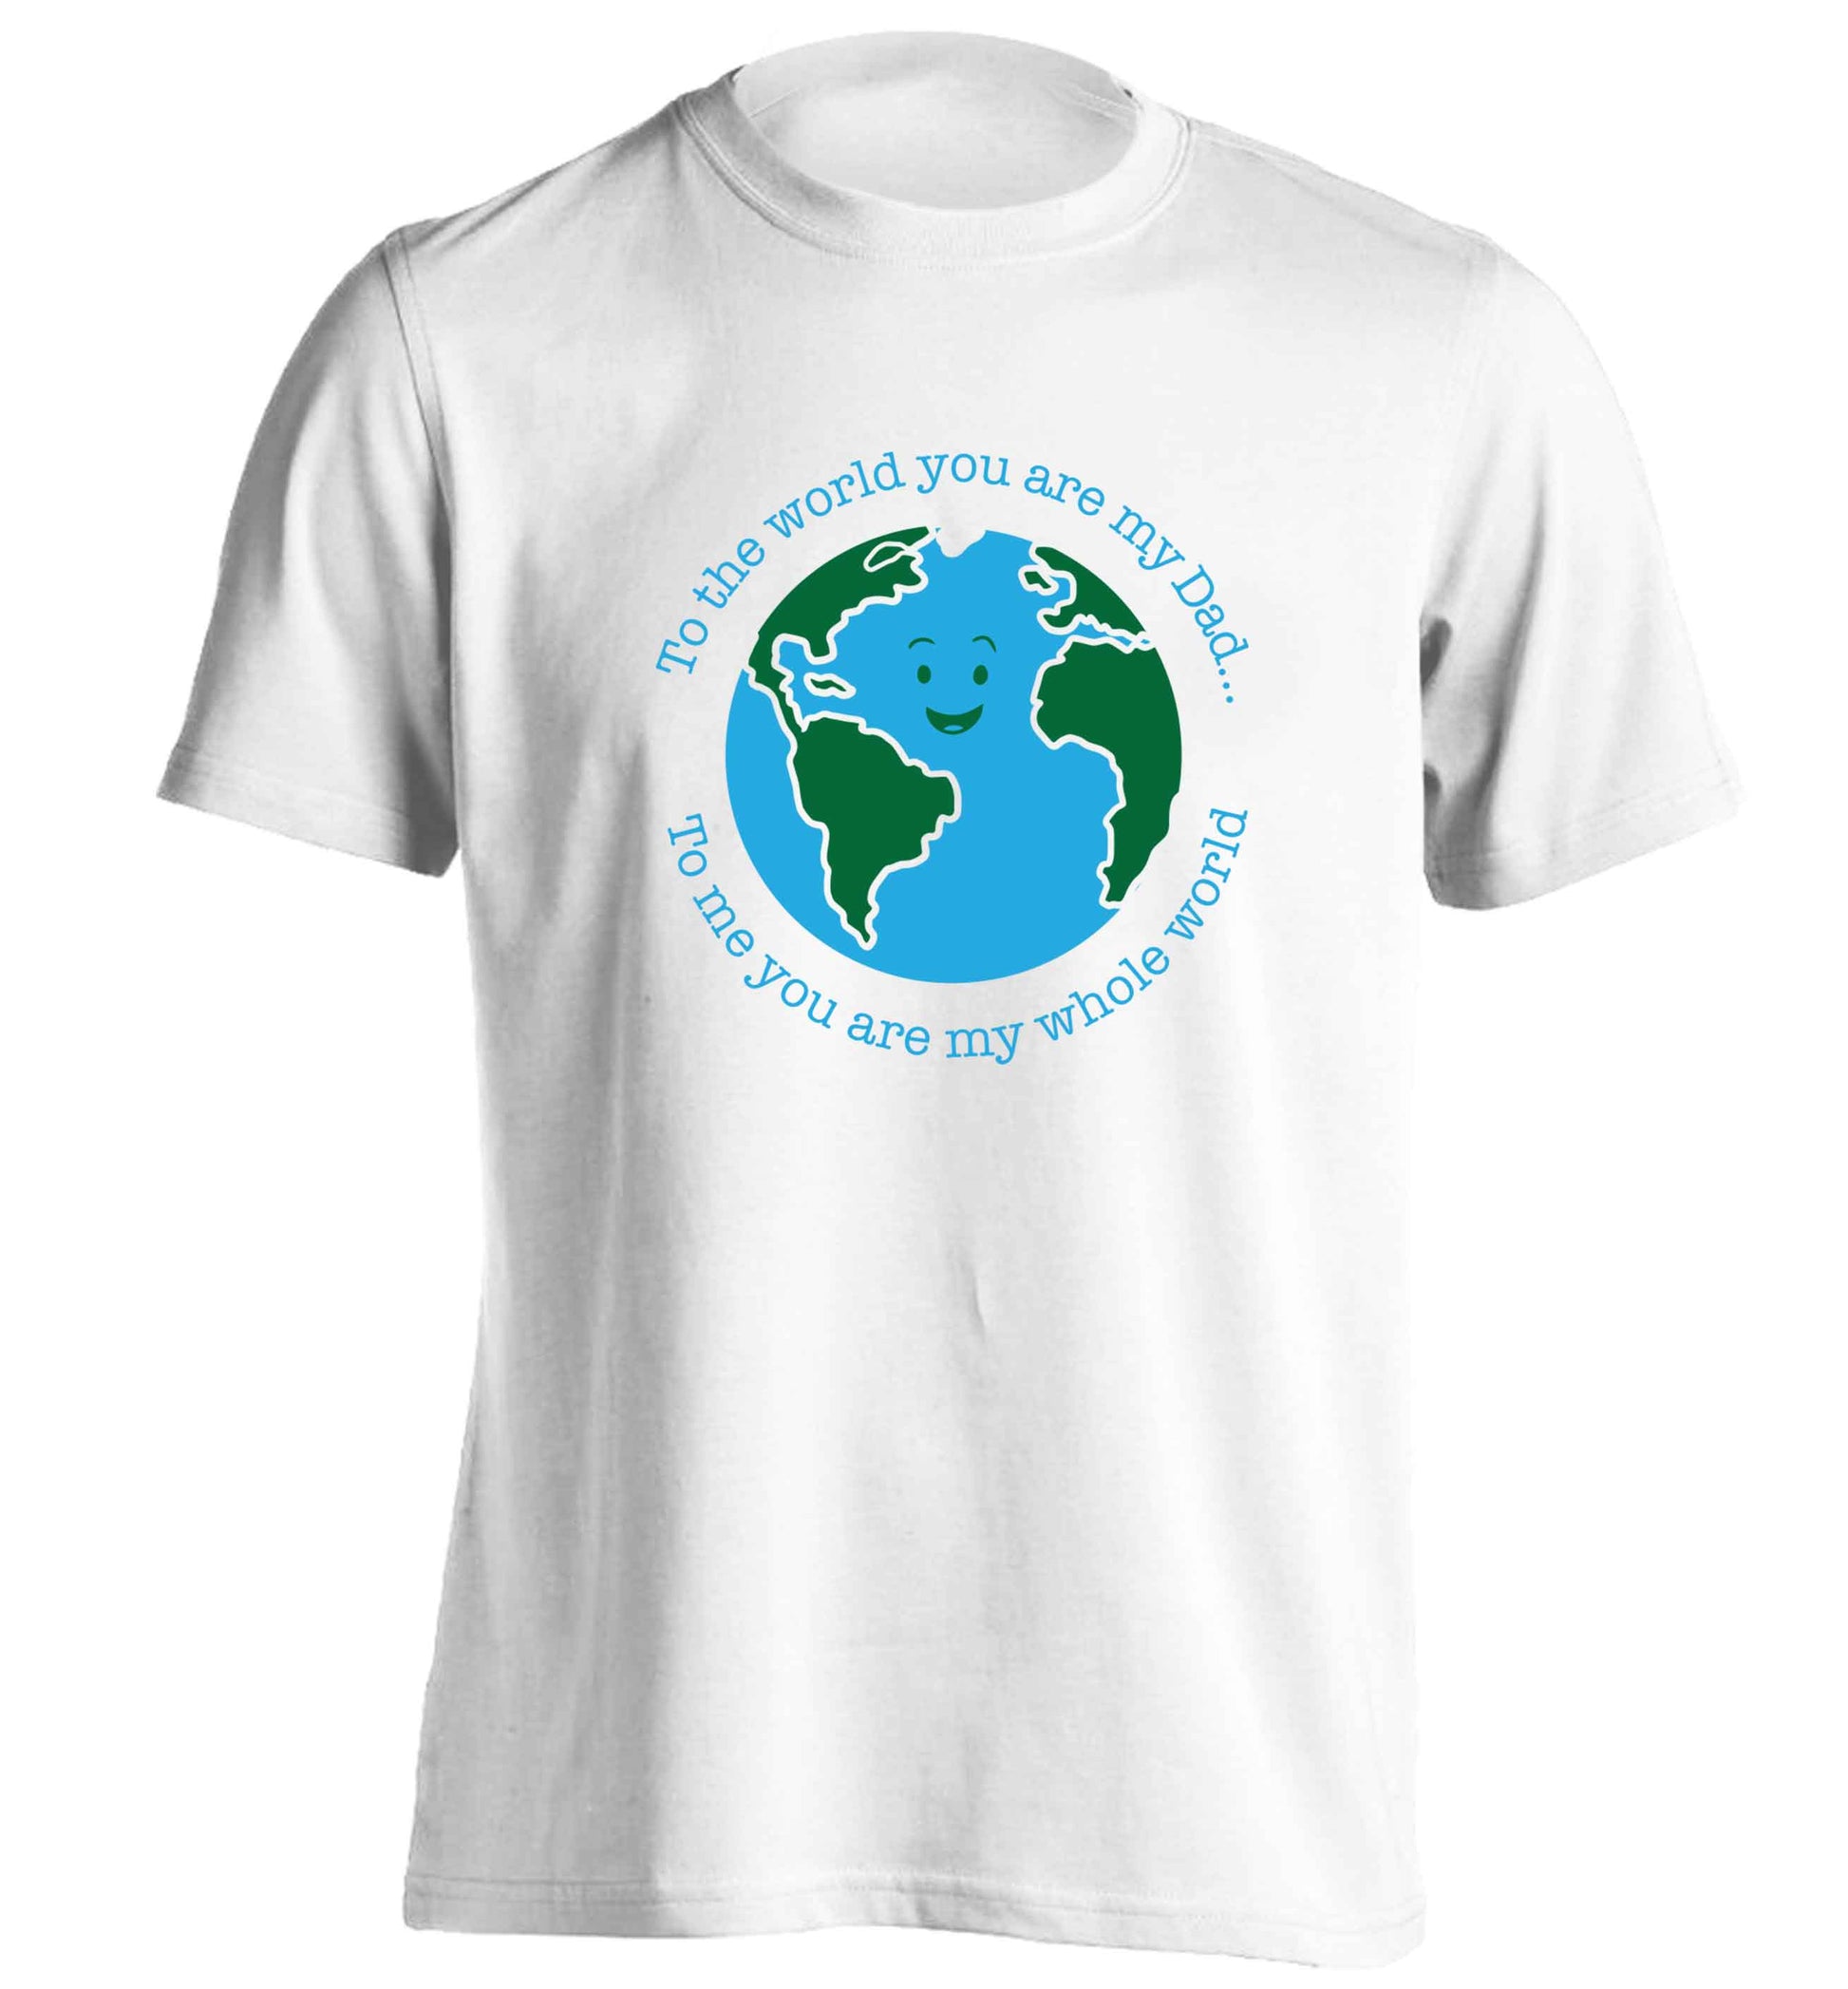 To the world you are my dad, to me you are my whole world adults unisex white Tshirt 2XL